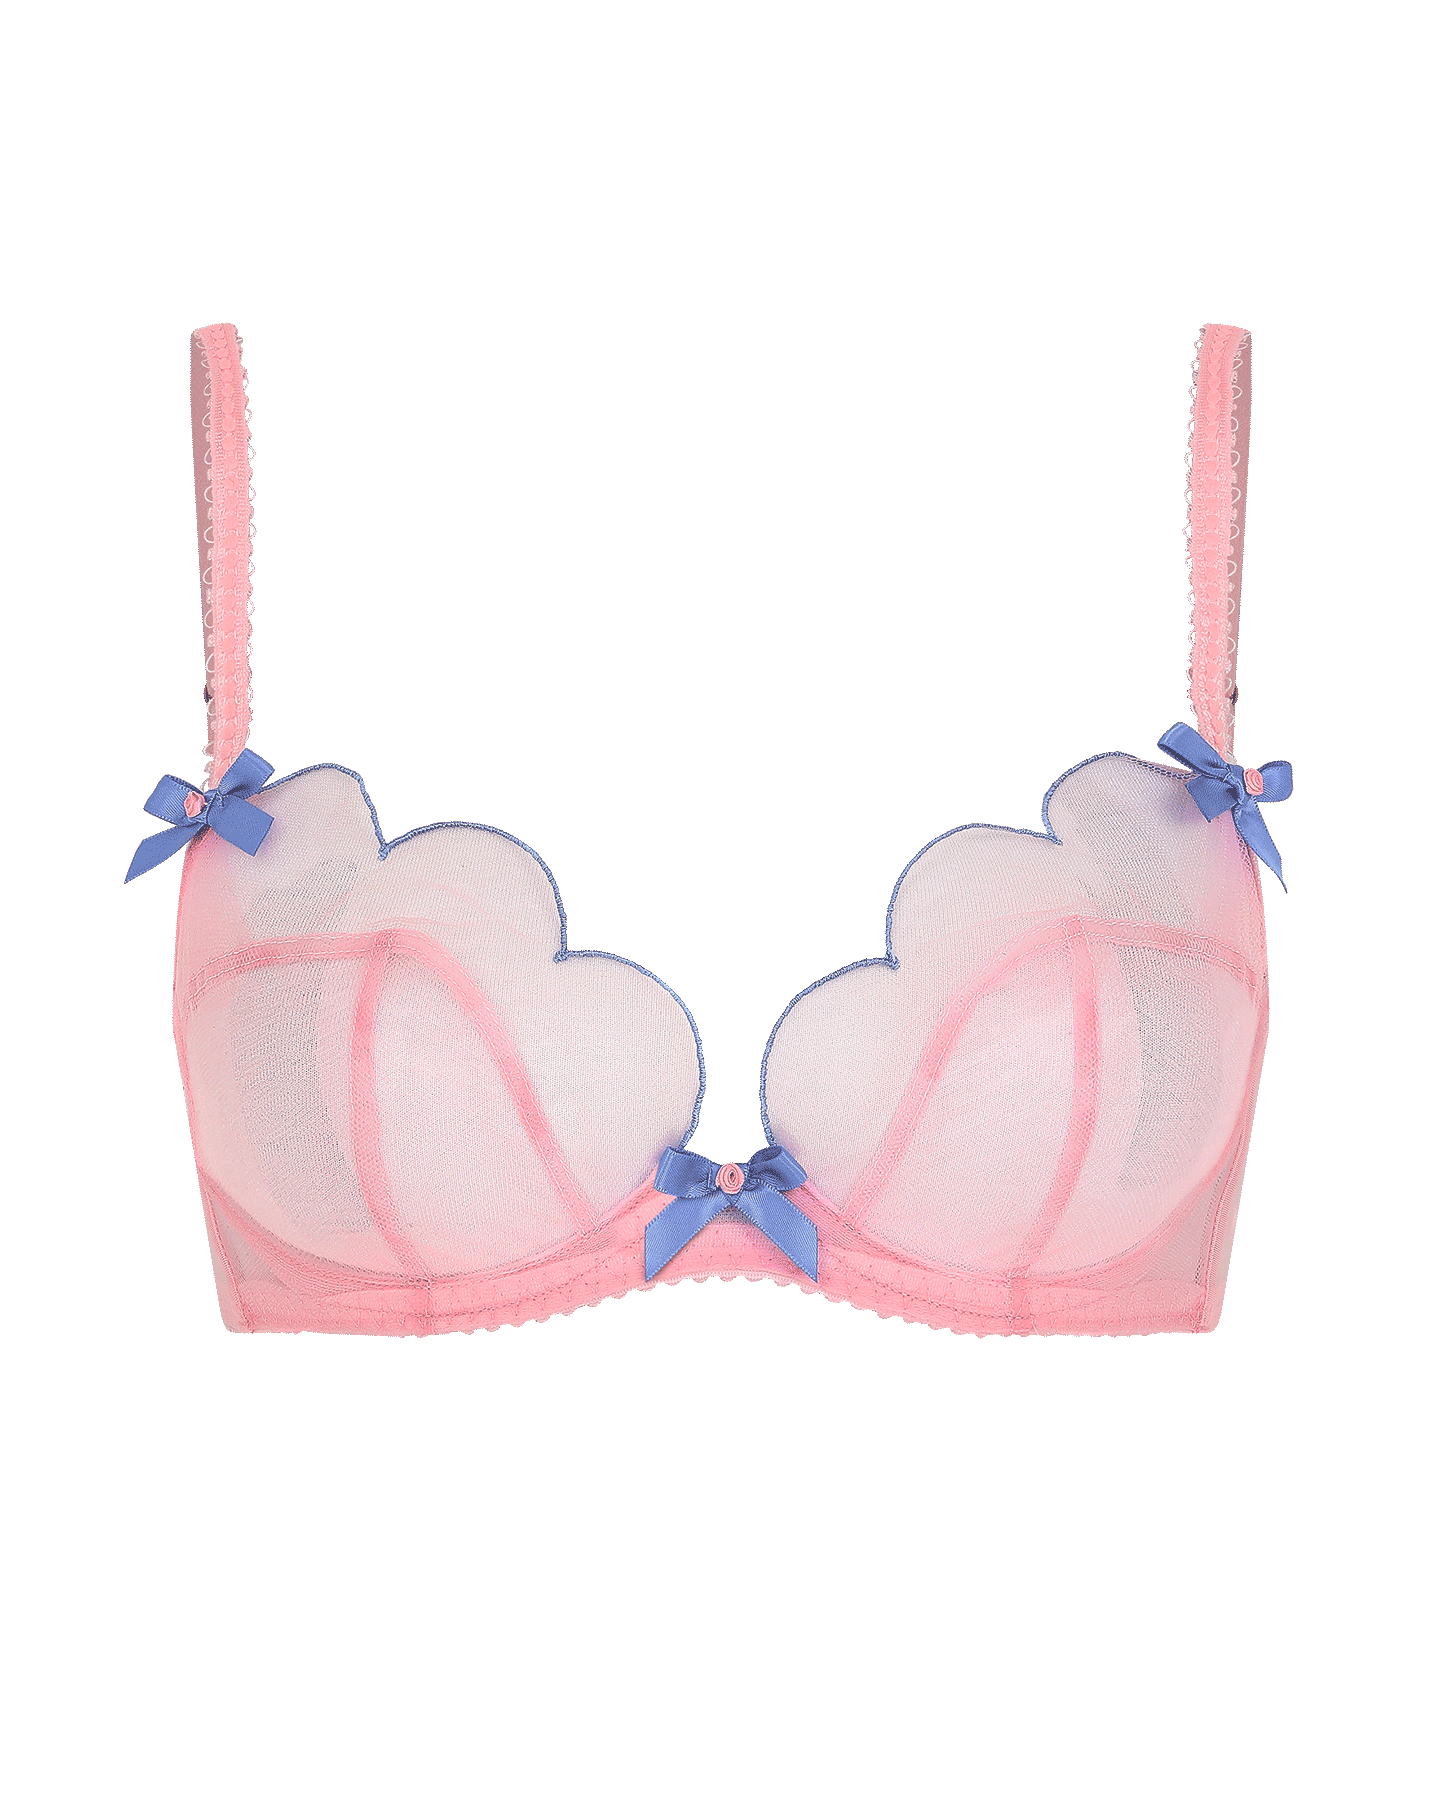 Lorna Plunge Underwired Bra  By Agent Provocateur Outlet